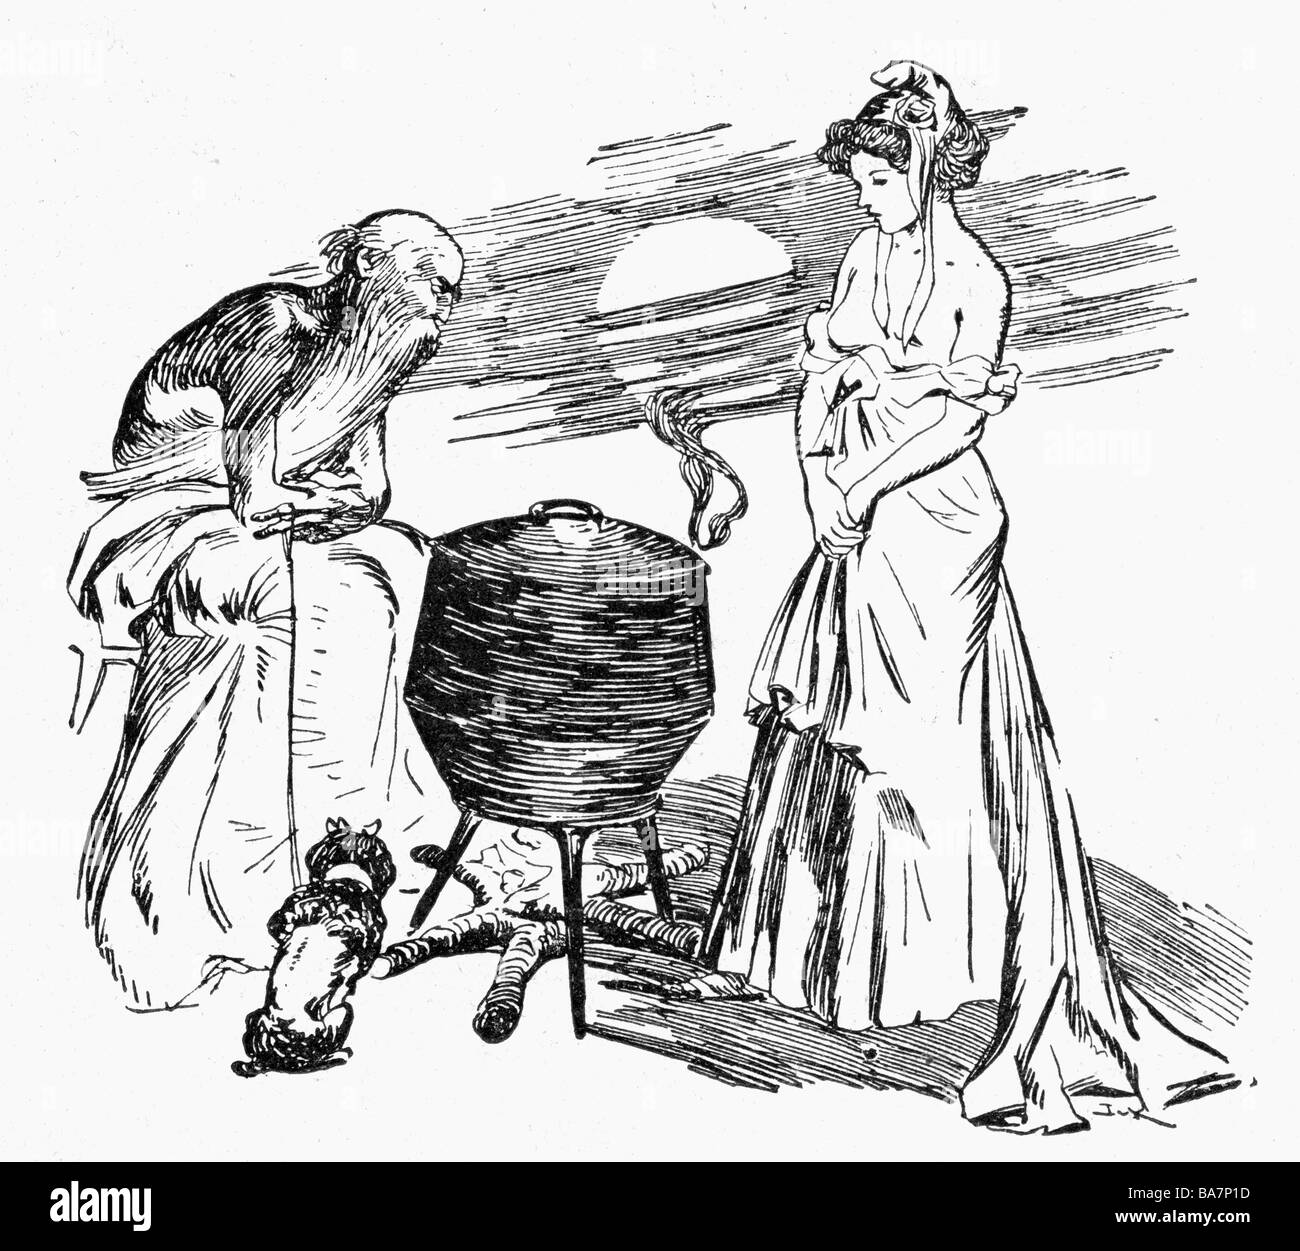 Dreyfus, Alfred, 9.10.1859 - 11.7.1935, French military officer, affair, caricature, 'France before the old man of destiny: What are you concocting for me in your Dreyfus kettle!', drawing, 'Petit Bleu', Brussels, 1899, , Stock Photo